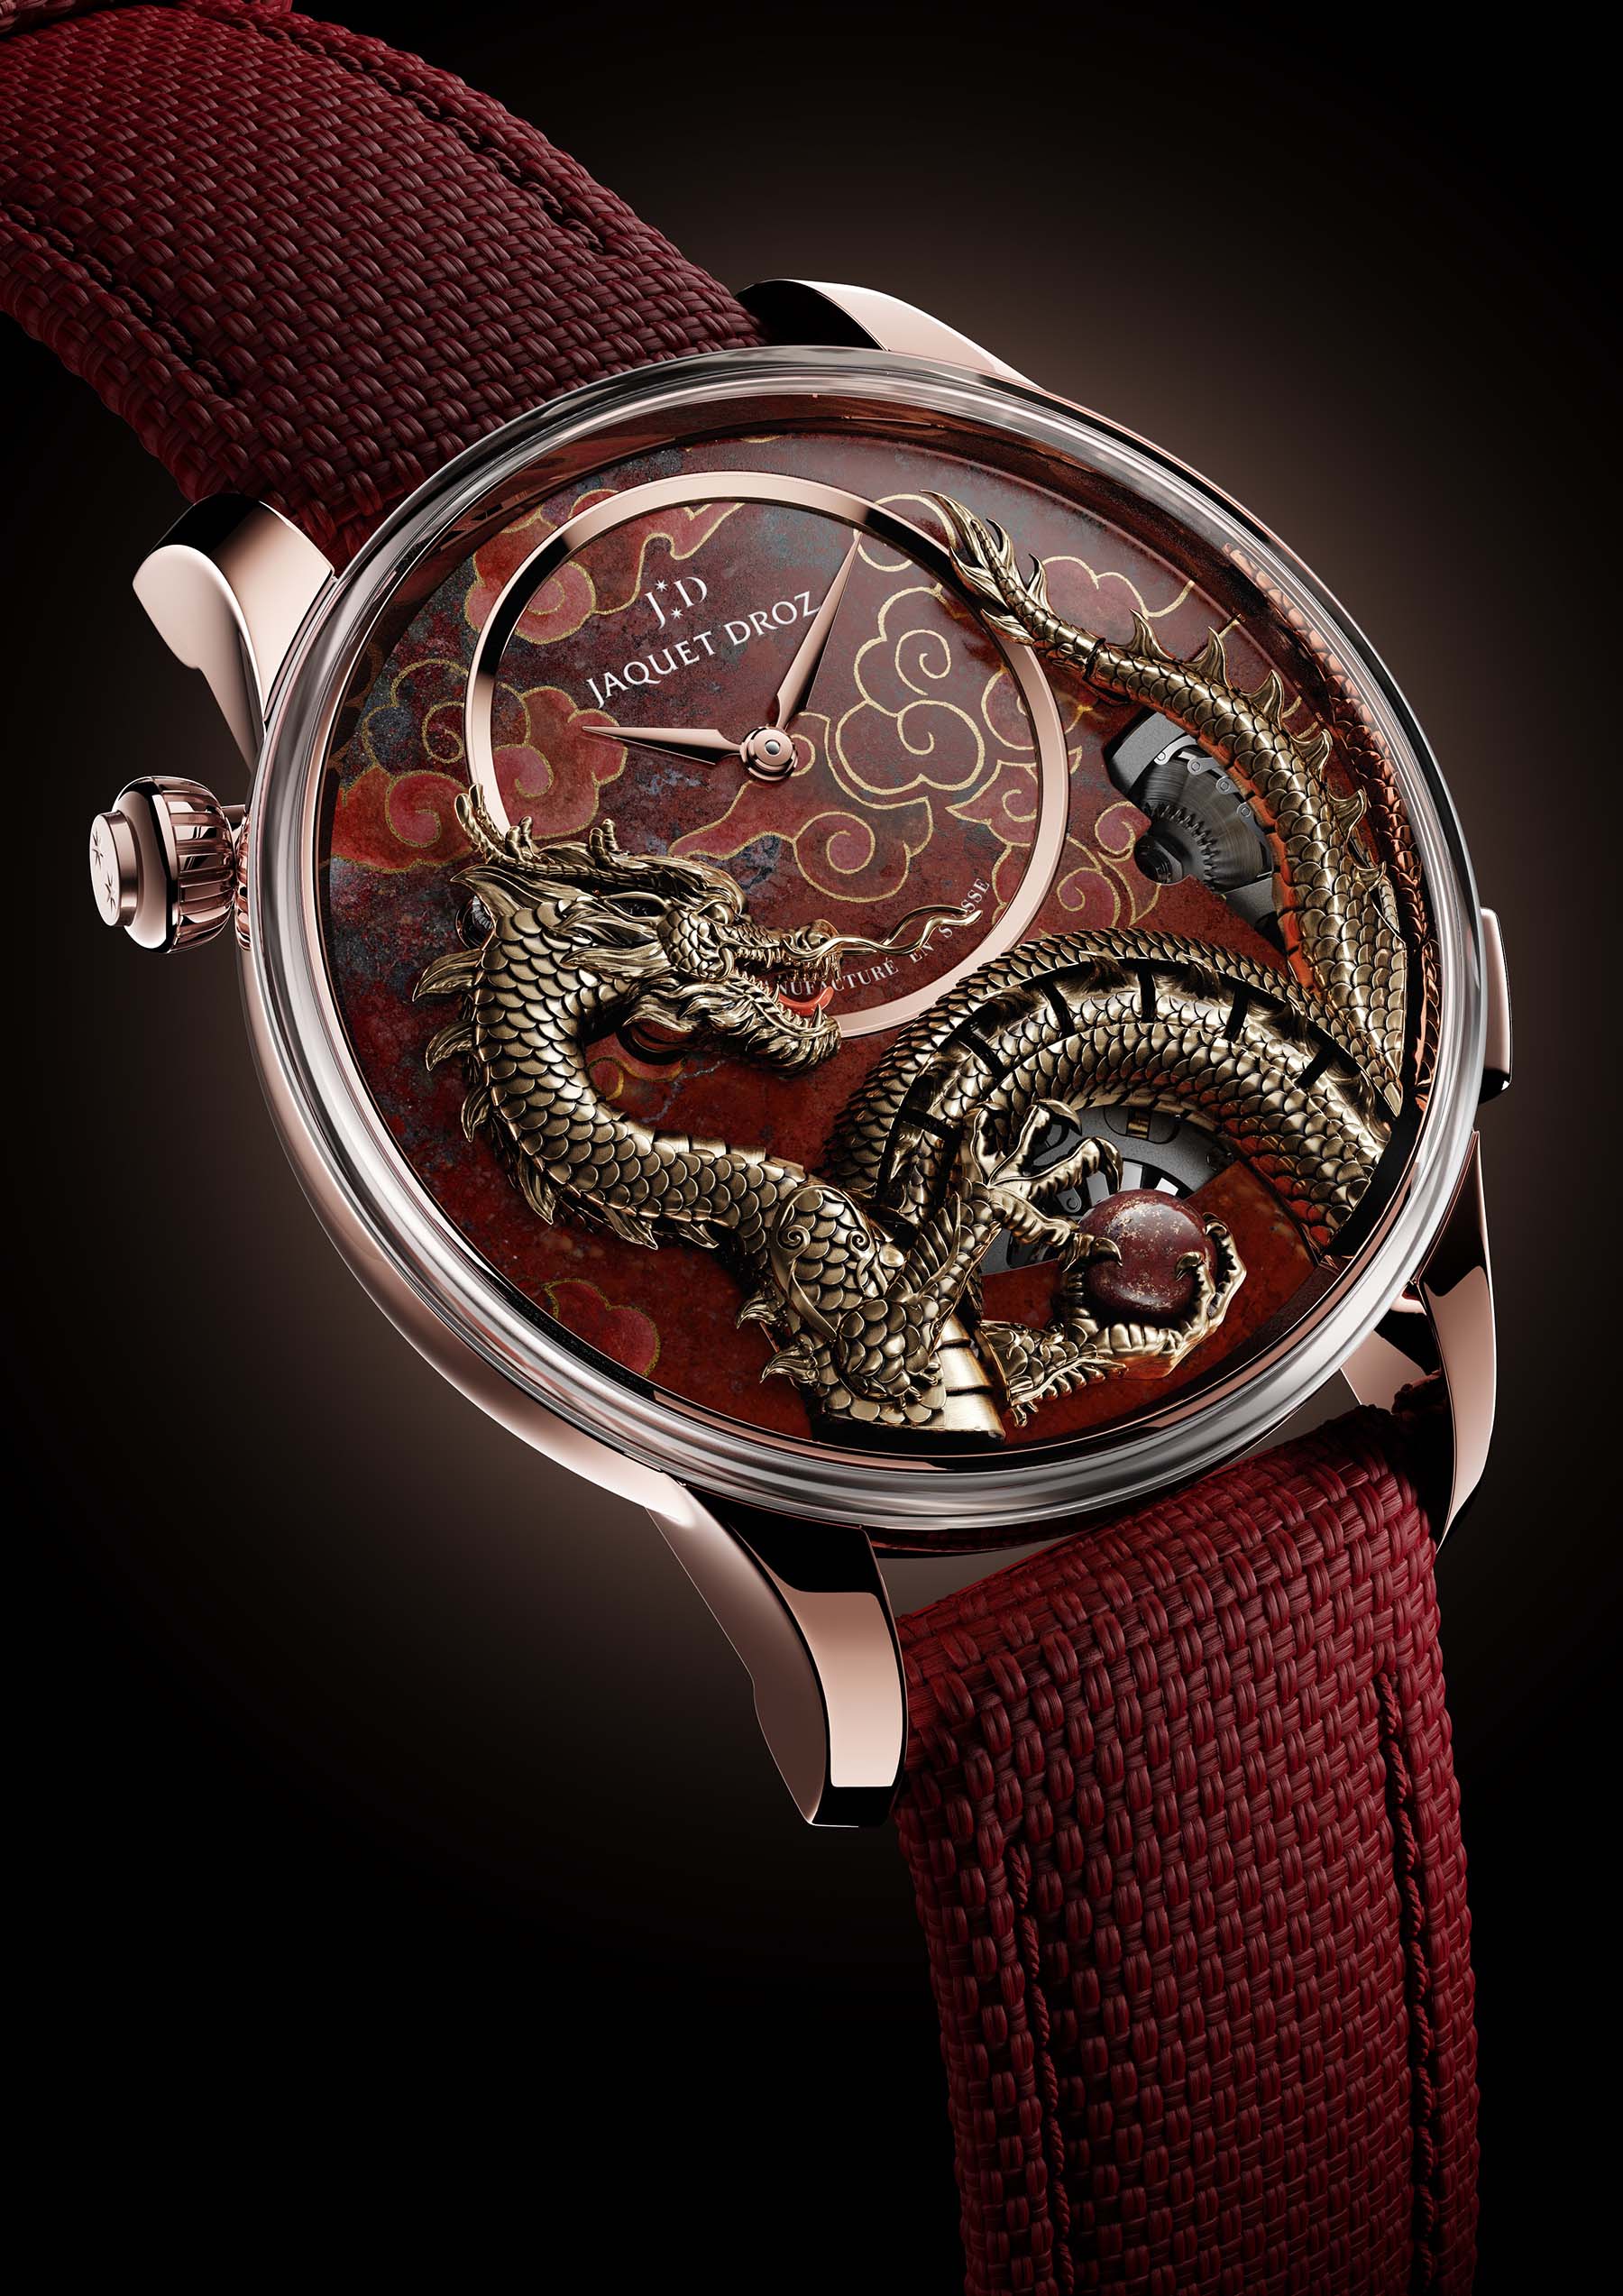 Jaquet Droz Imperial Dragon Automaton Red Gold Chinese New Year